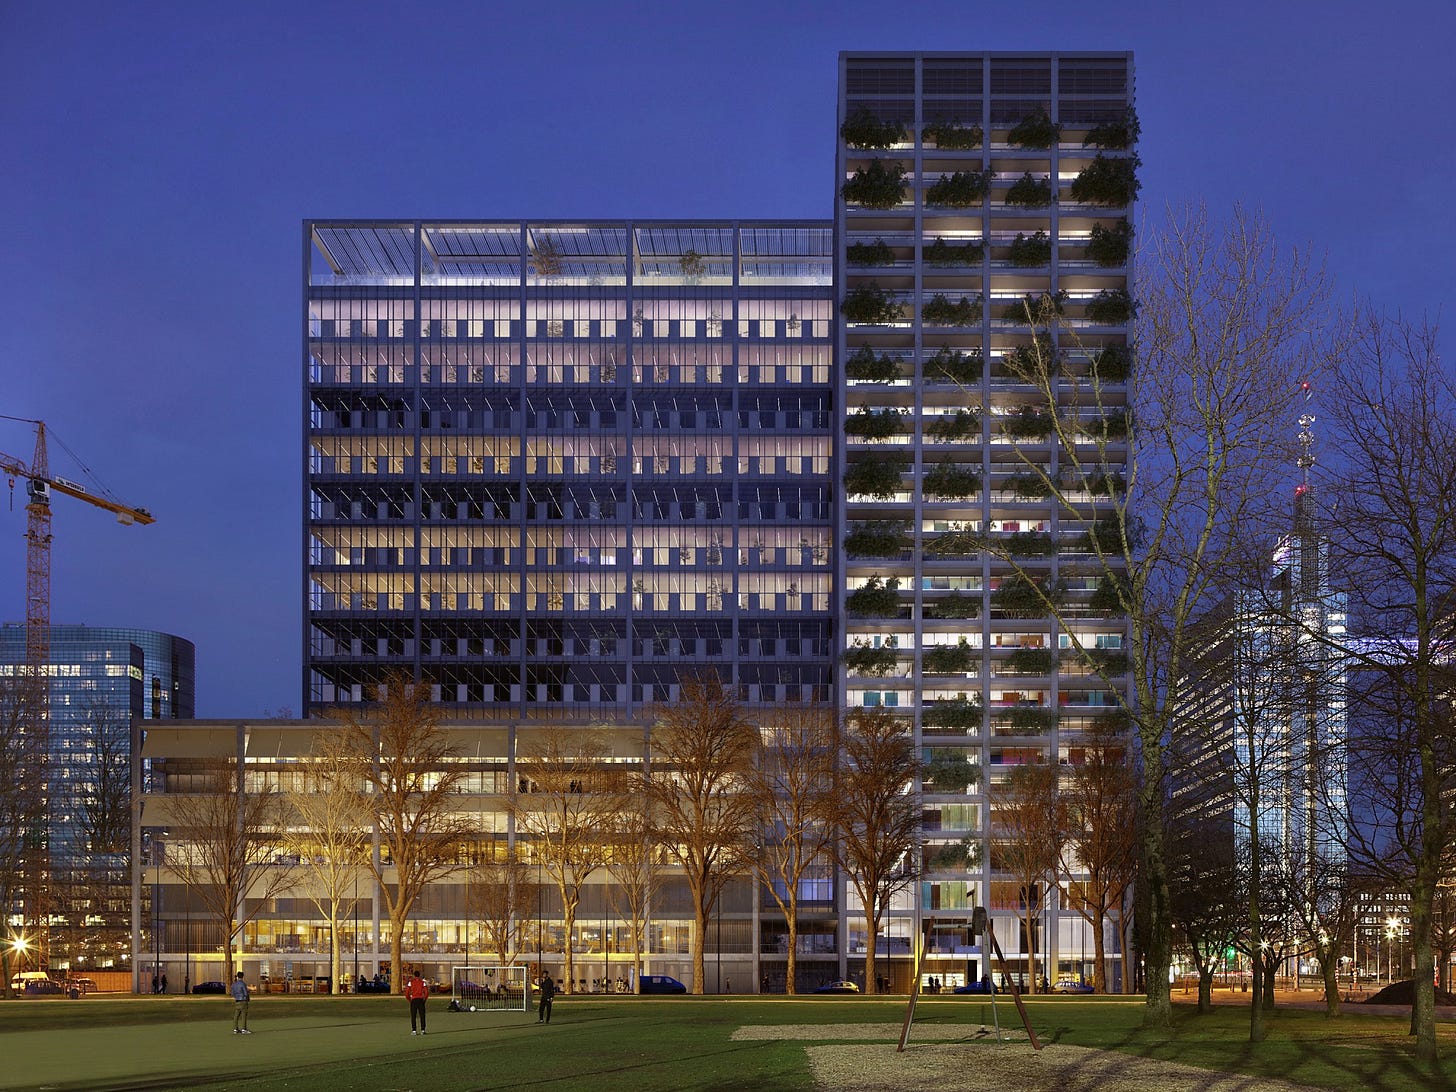 Photo, taken at night, of a multi-part mid-rise office tower in Brussels, with a park in the foreground and other buildings in the background